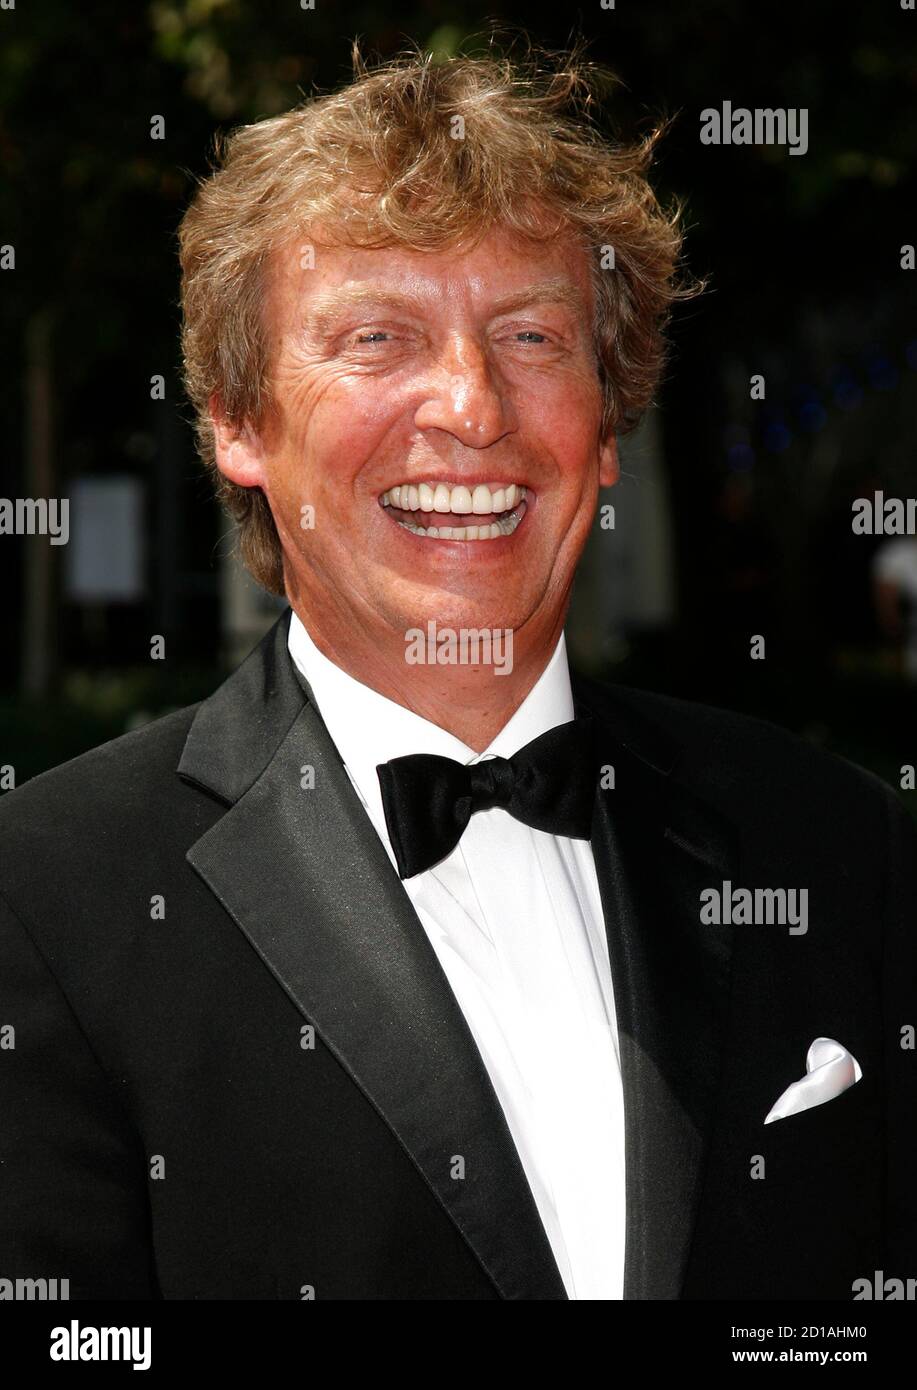 Producer Nigel Lythgoe arrives at the Primetime Creative Arts Emmy Awards in Los Angeles, September 12, 2009. REUTERS/Danny Moloshok (UNITED STATES ENTERTAINMENT) Stock Photo